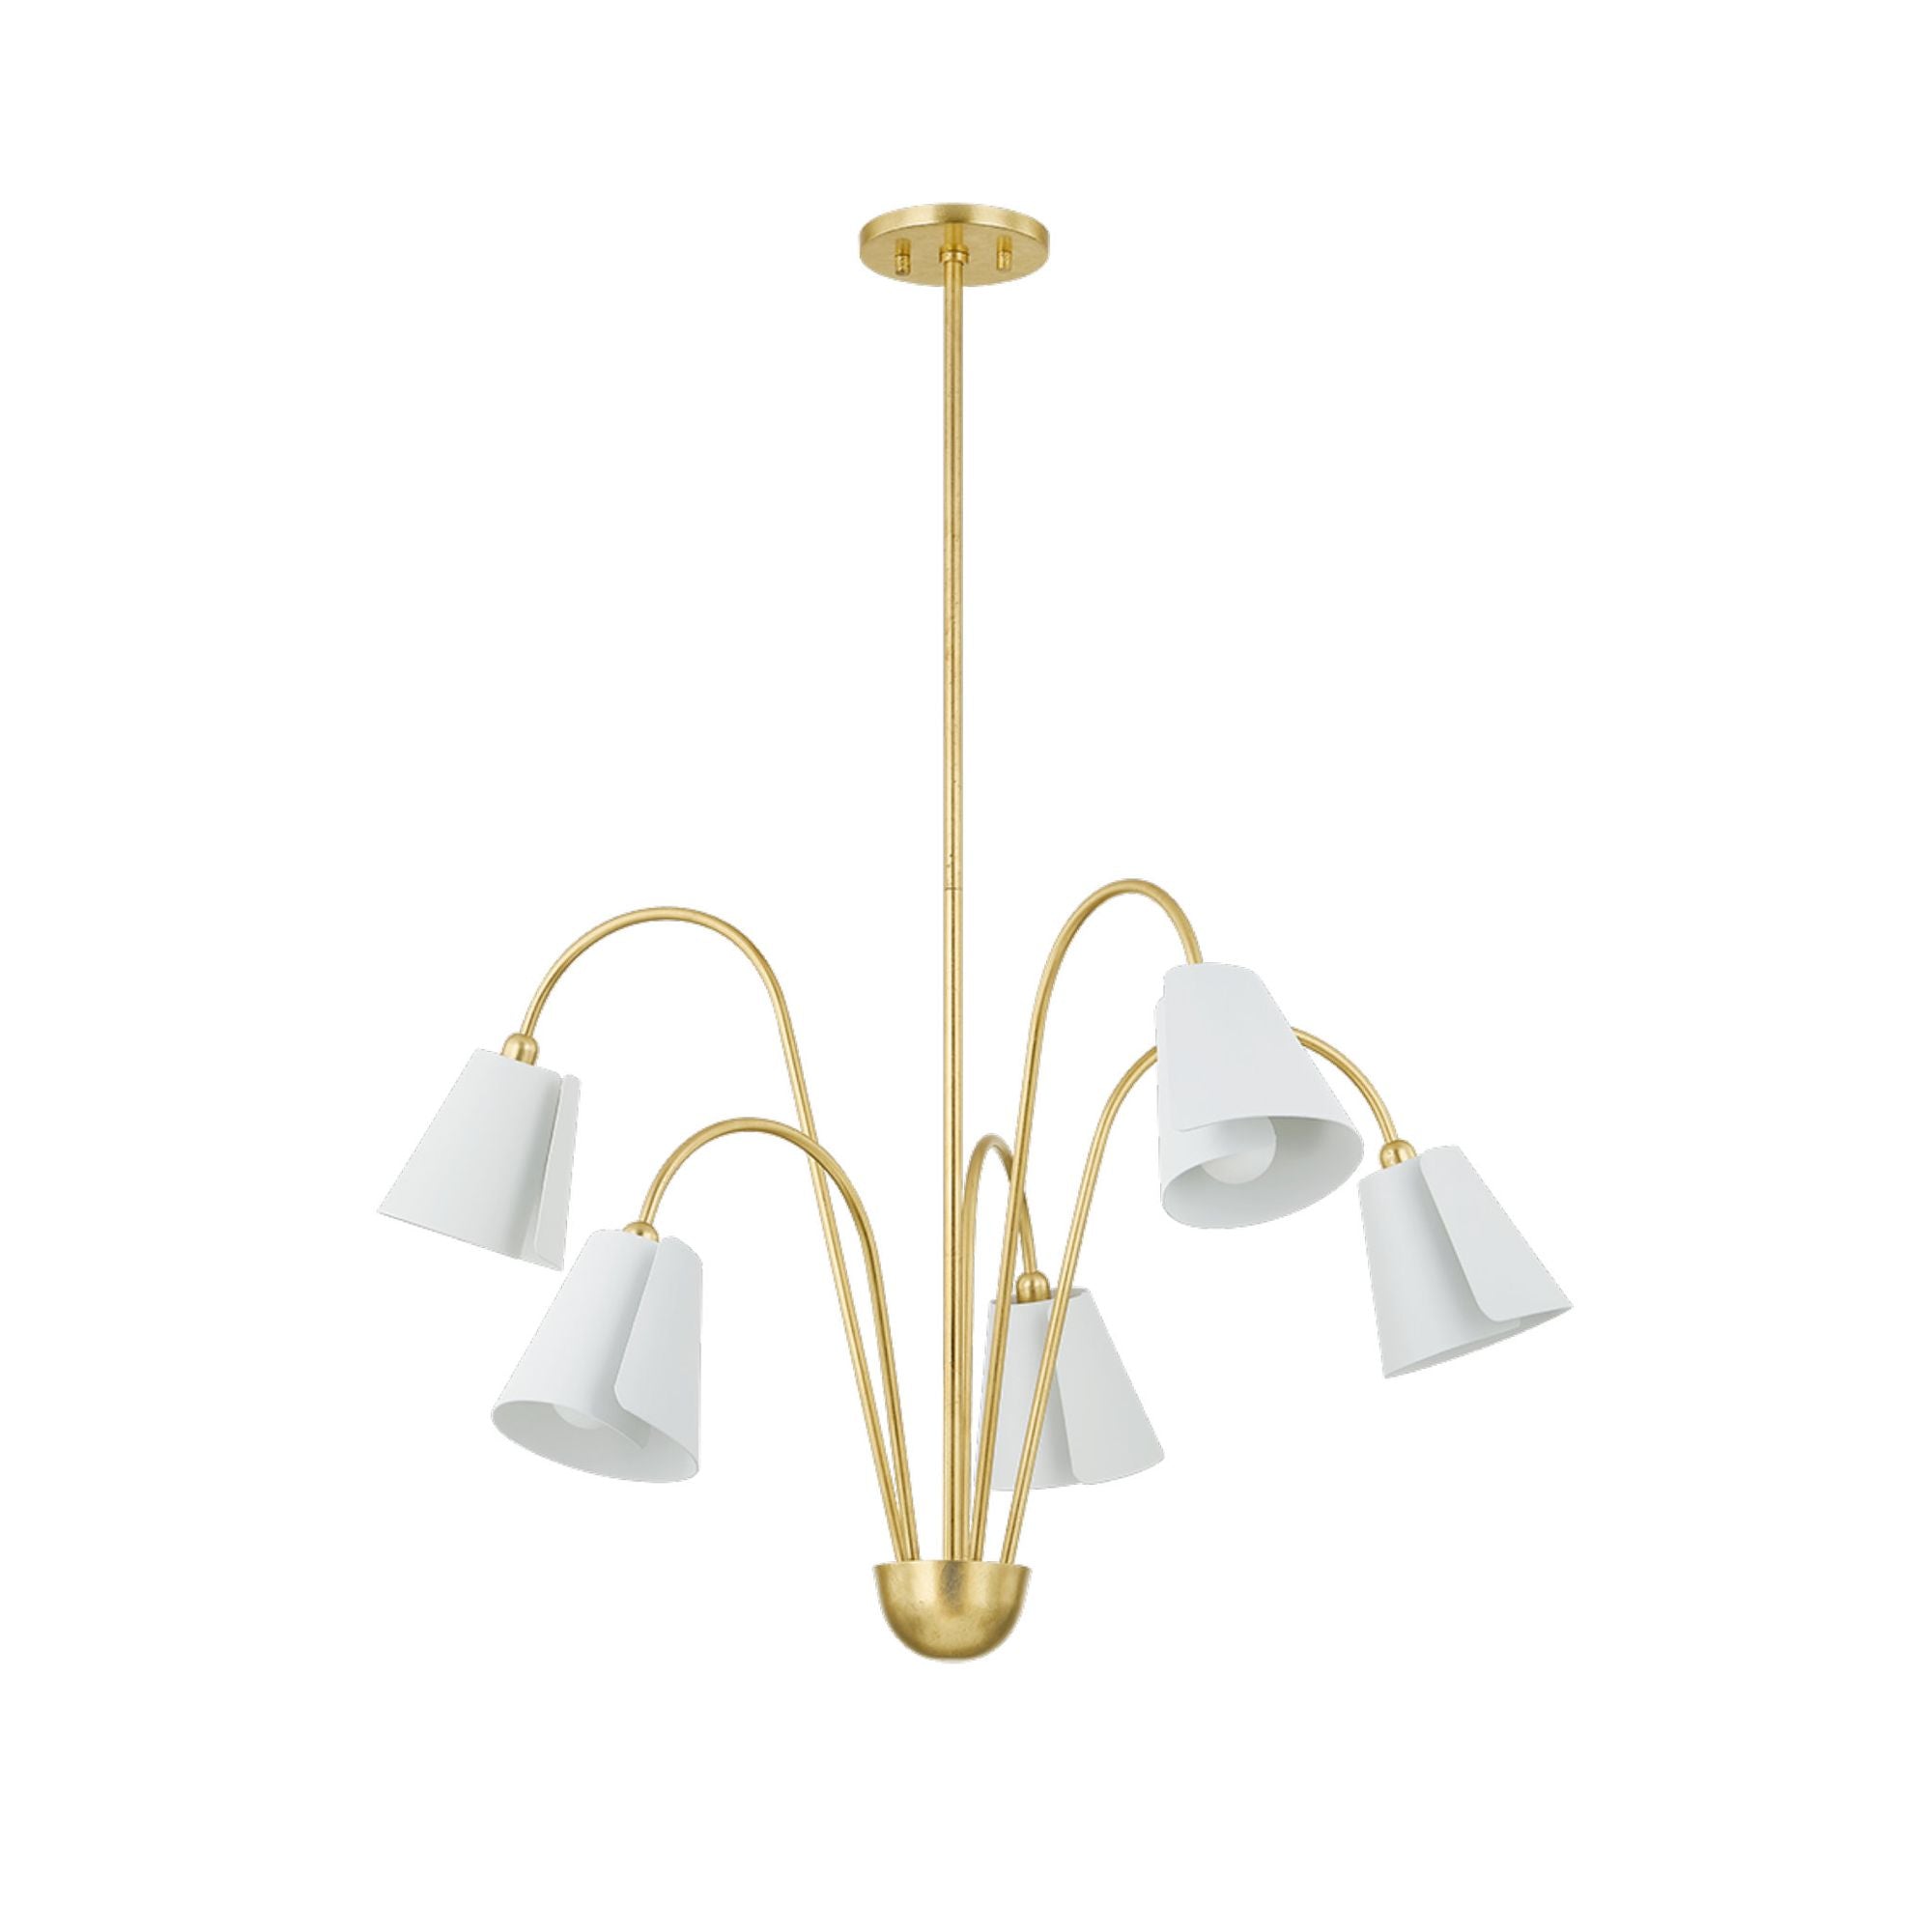 Lila 5-Light Chandelier in Gold Leaf/Textured On White Combo